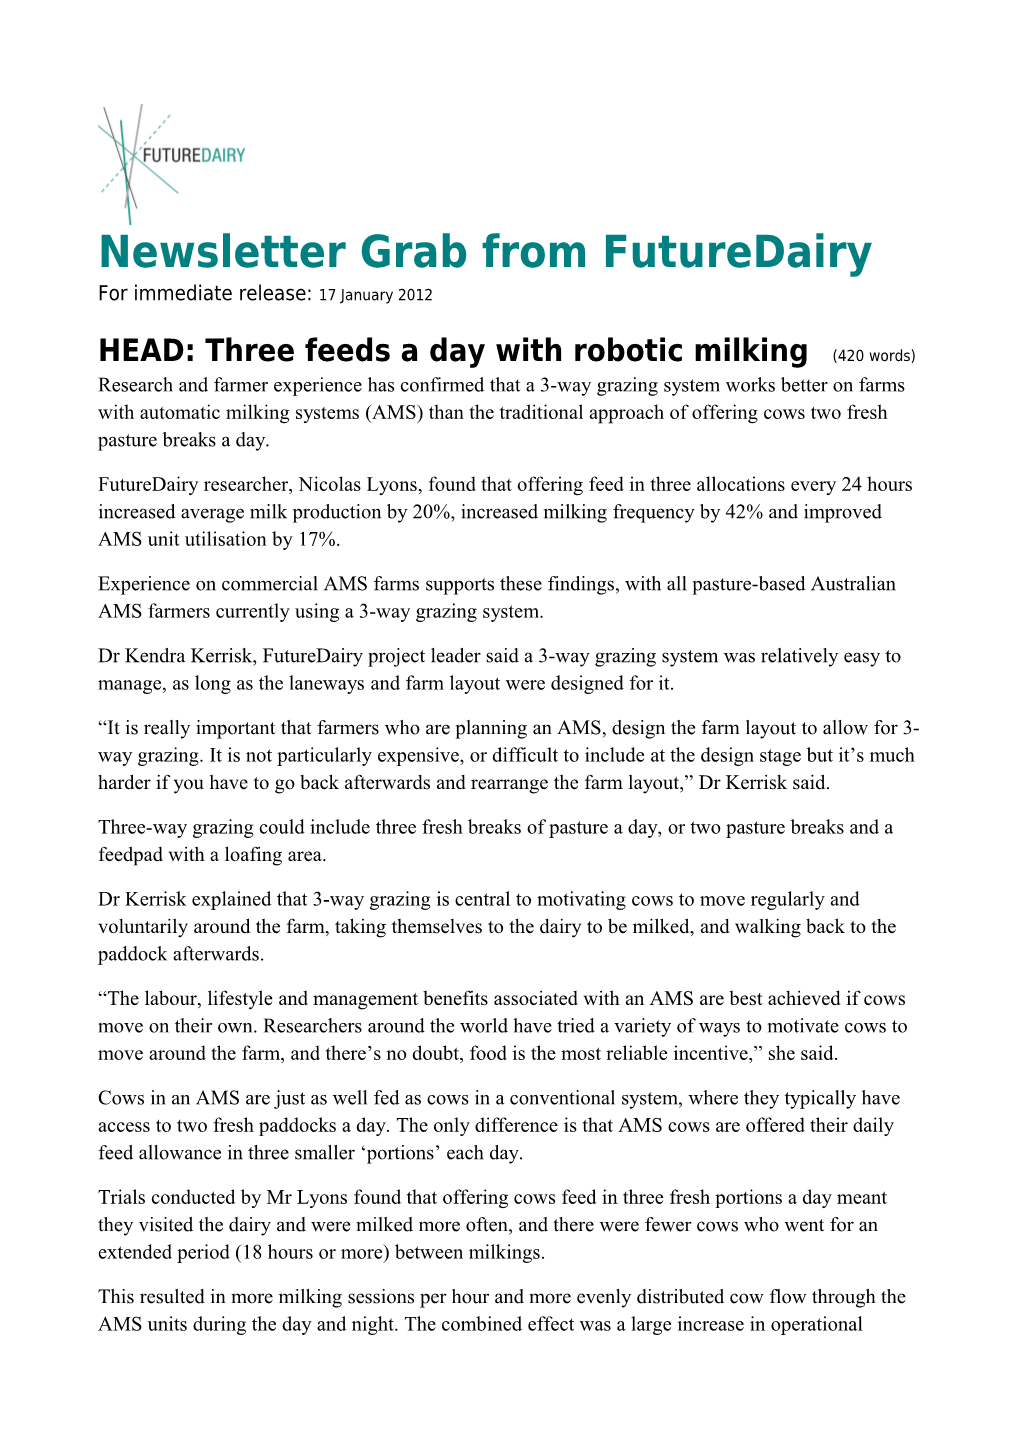 HEAD: Three Feeds a Day with Robotic Milking (420Words)